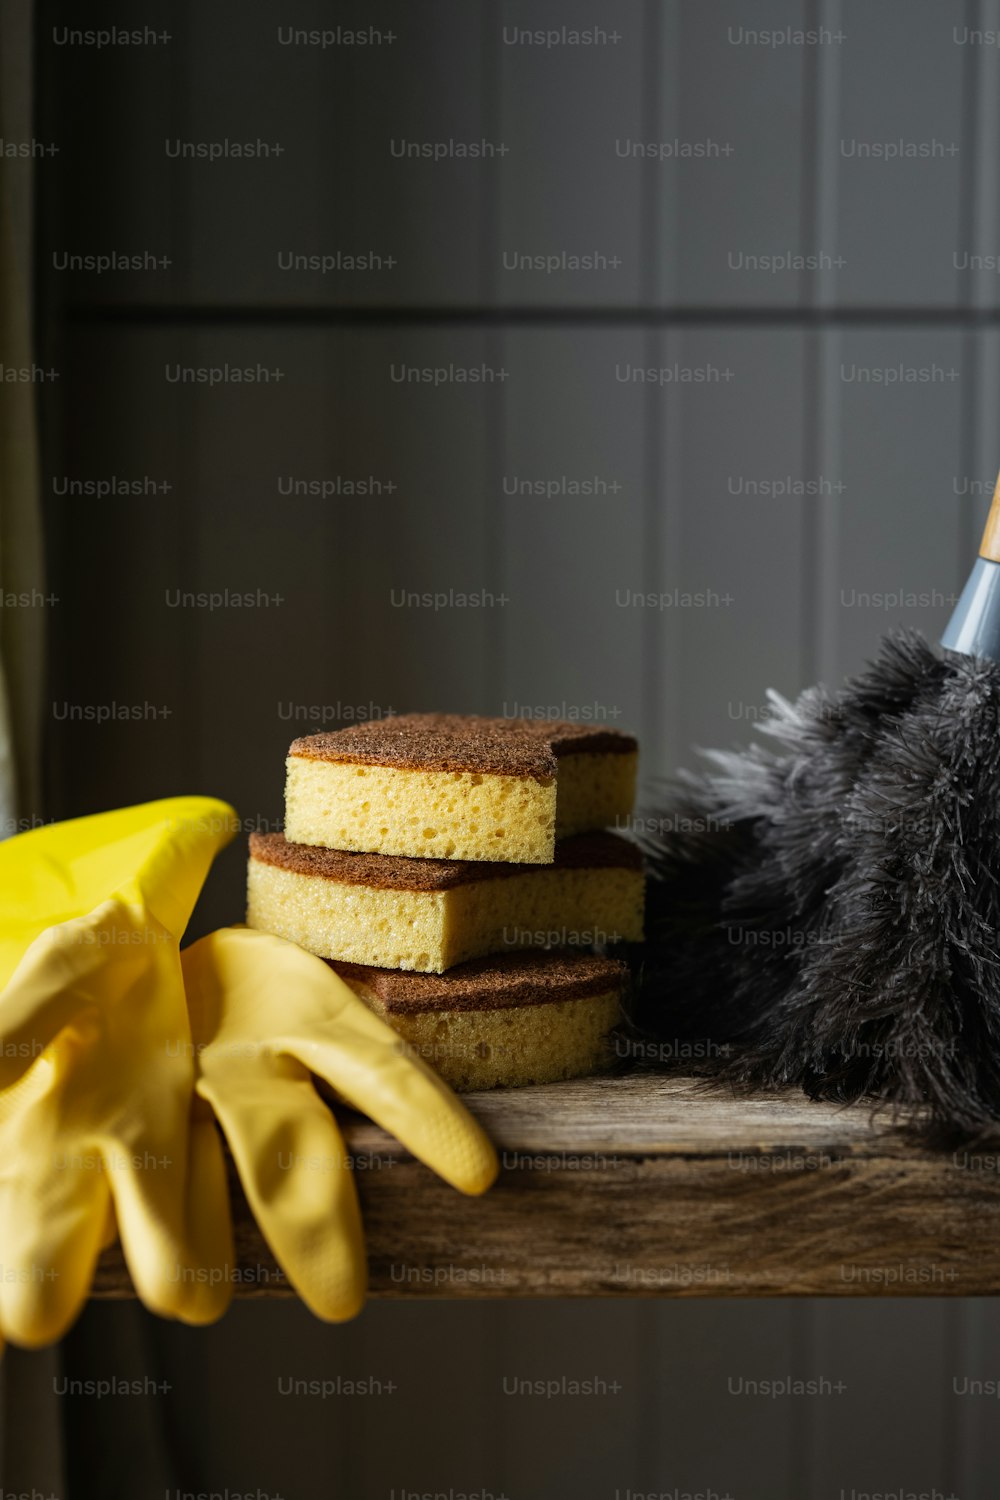 a pile of yellow sponges next to a pile of black sponges